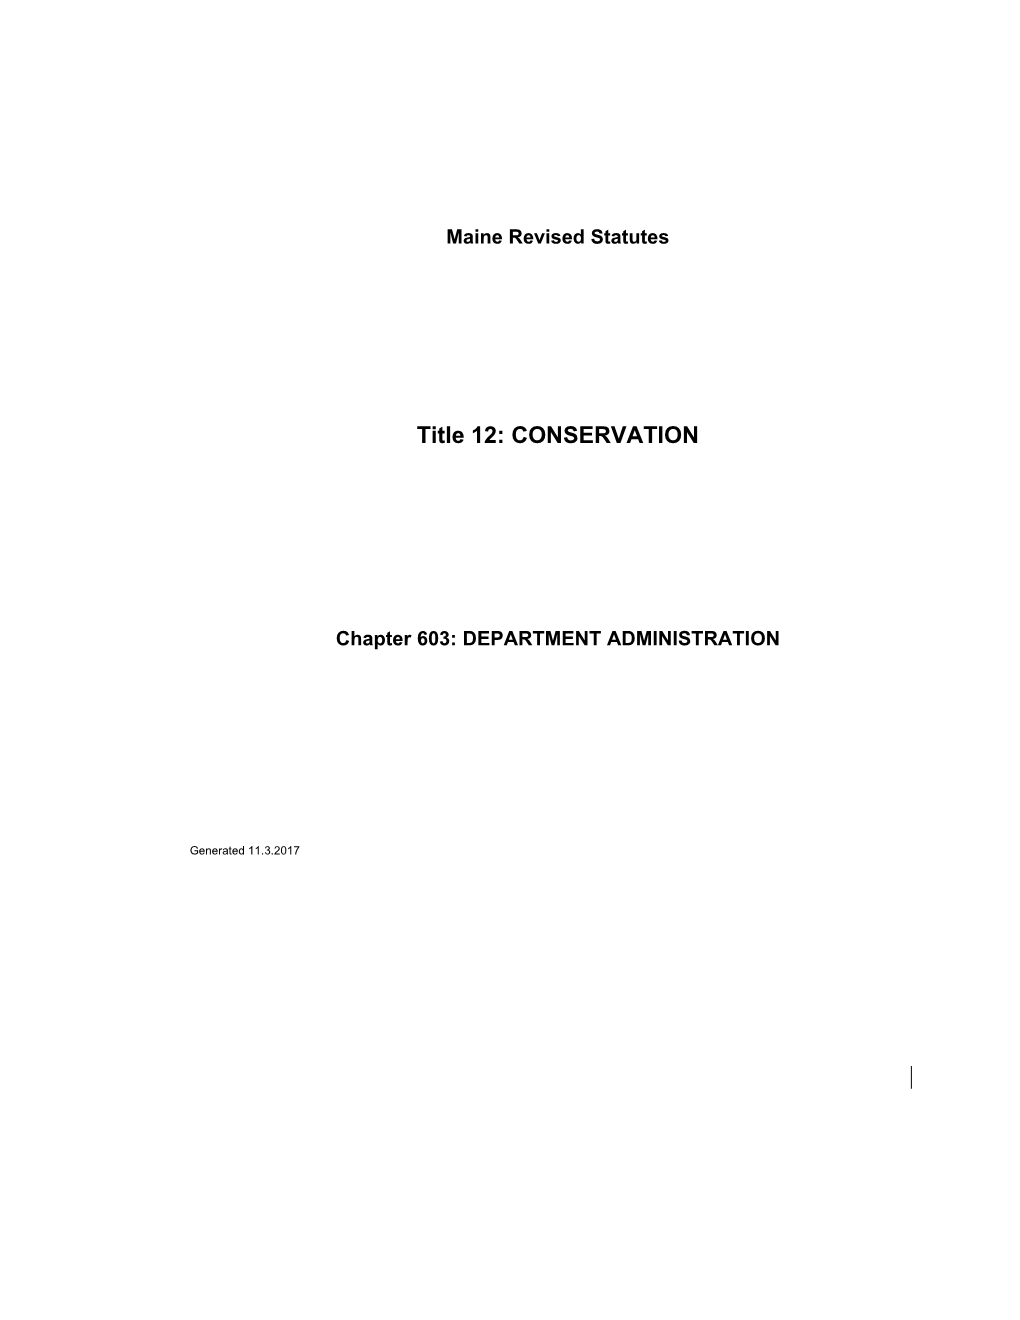 MRS Title 12 6022. COMMISSIONER's APPOINTMENT, DUTIES and POWERS